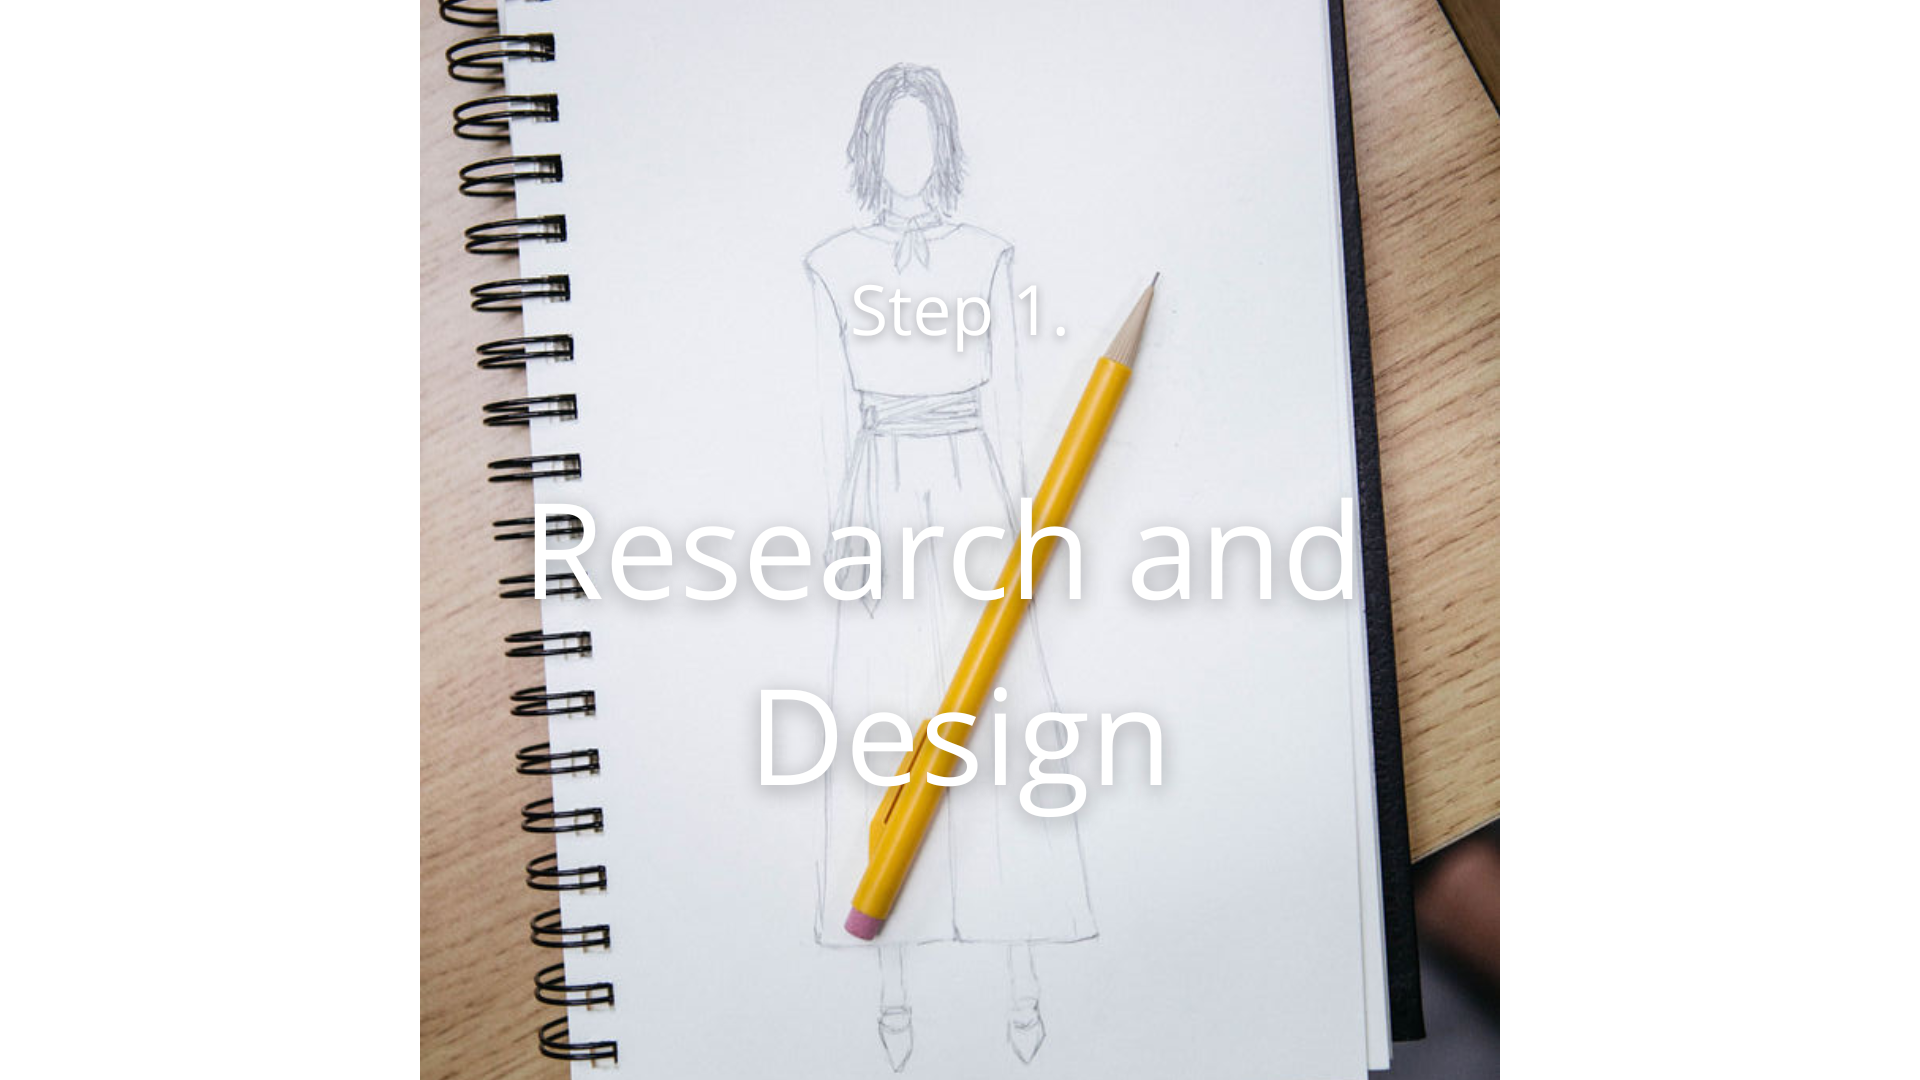 Step 1. Research and Design (1).png